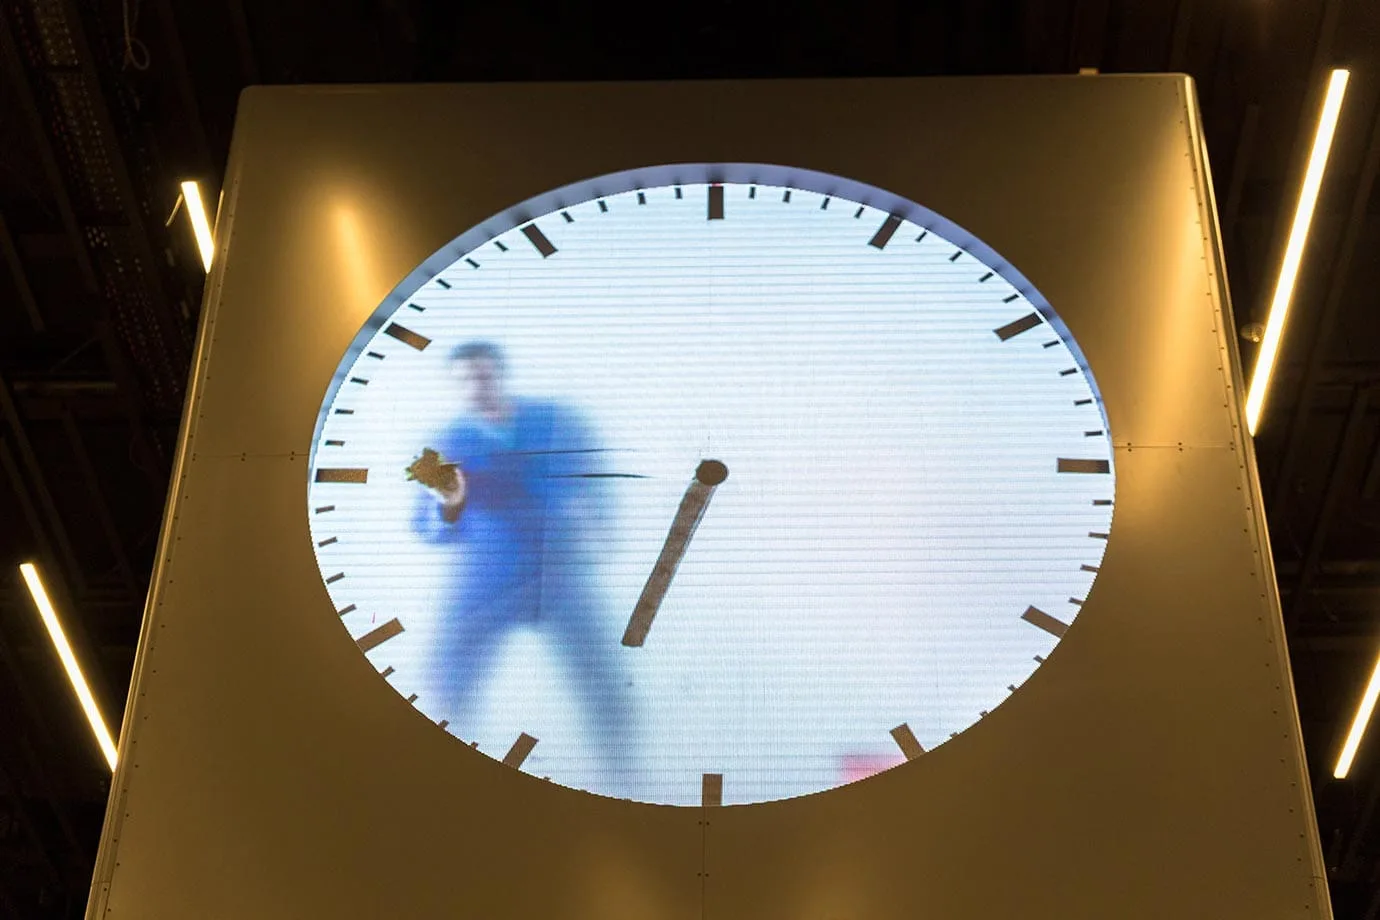 Man in the clock at Schiphol Airport